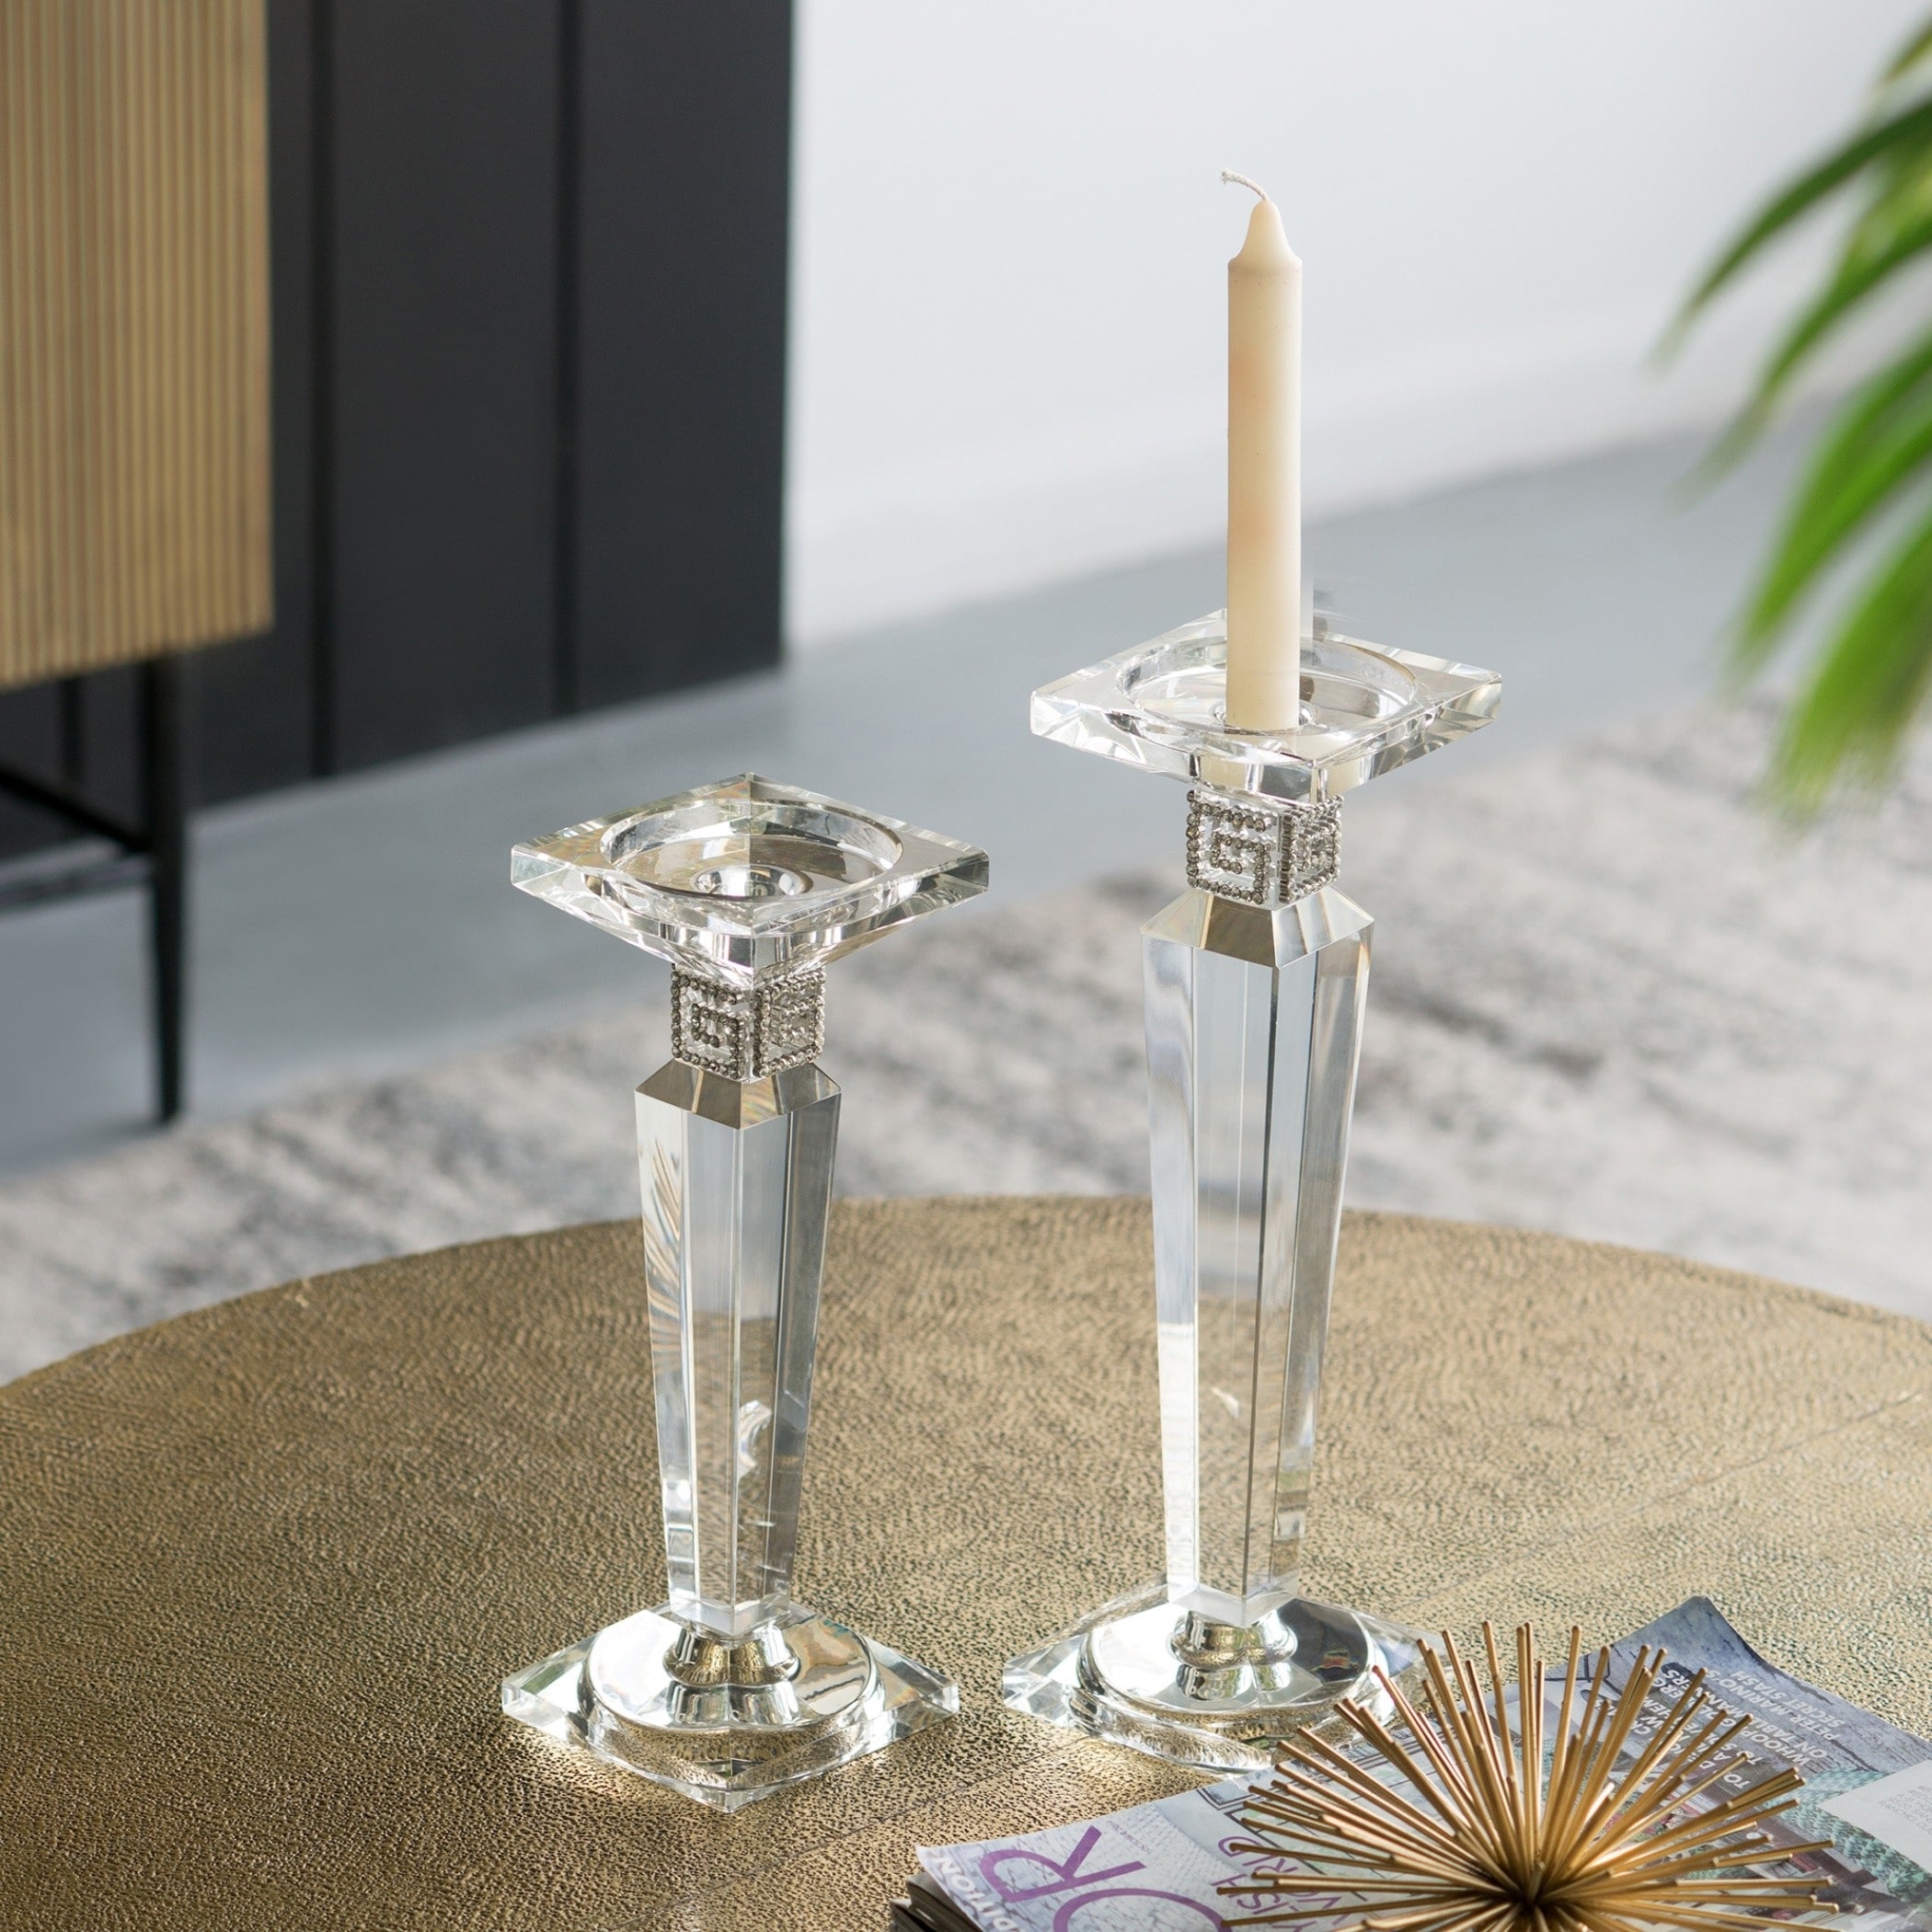 2 Crystal candlestick holders